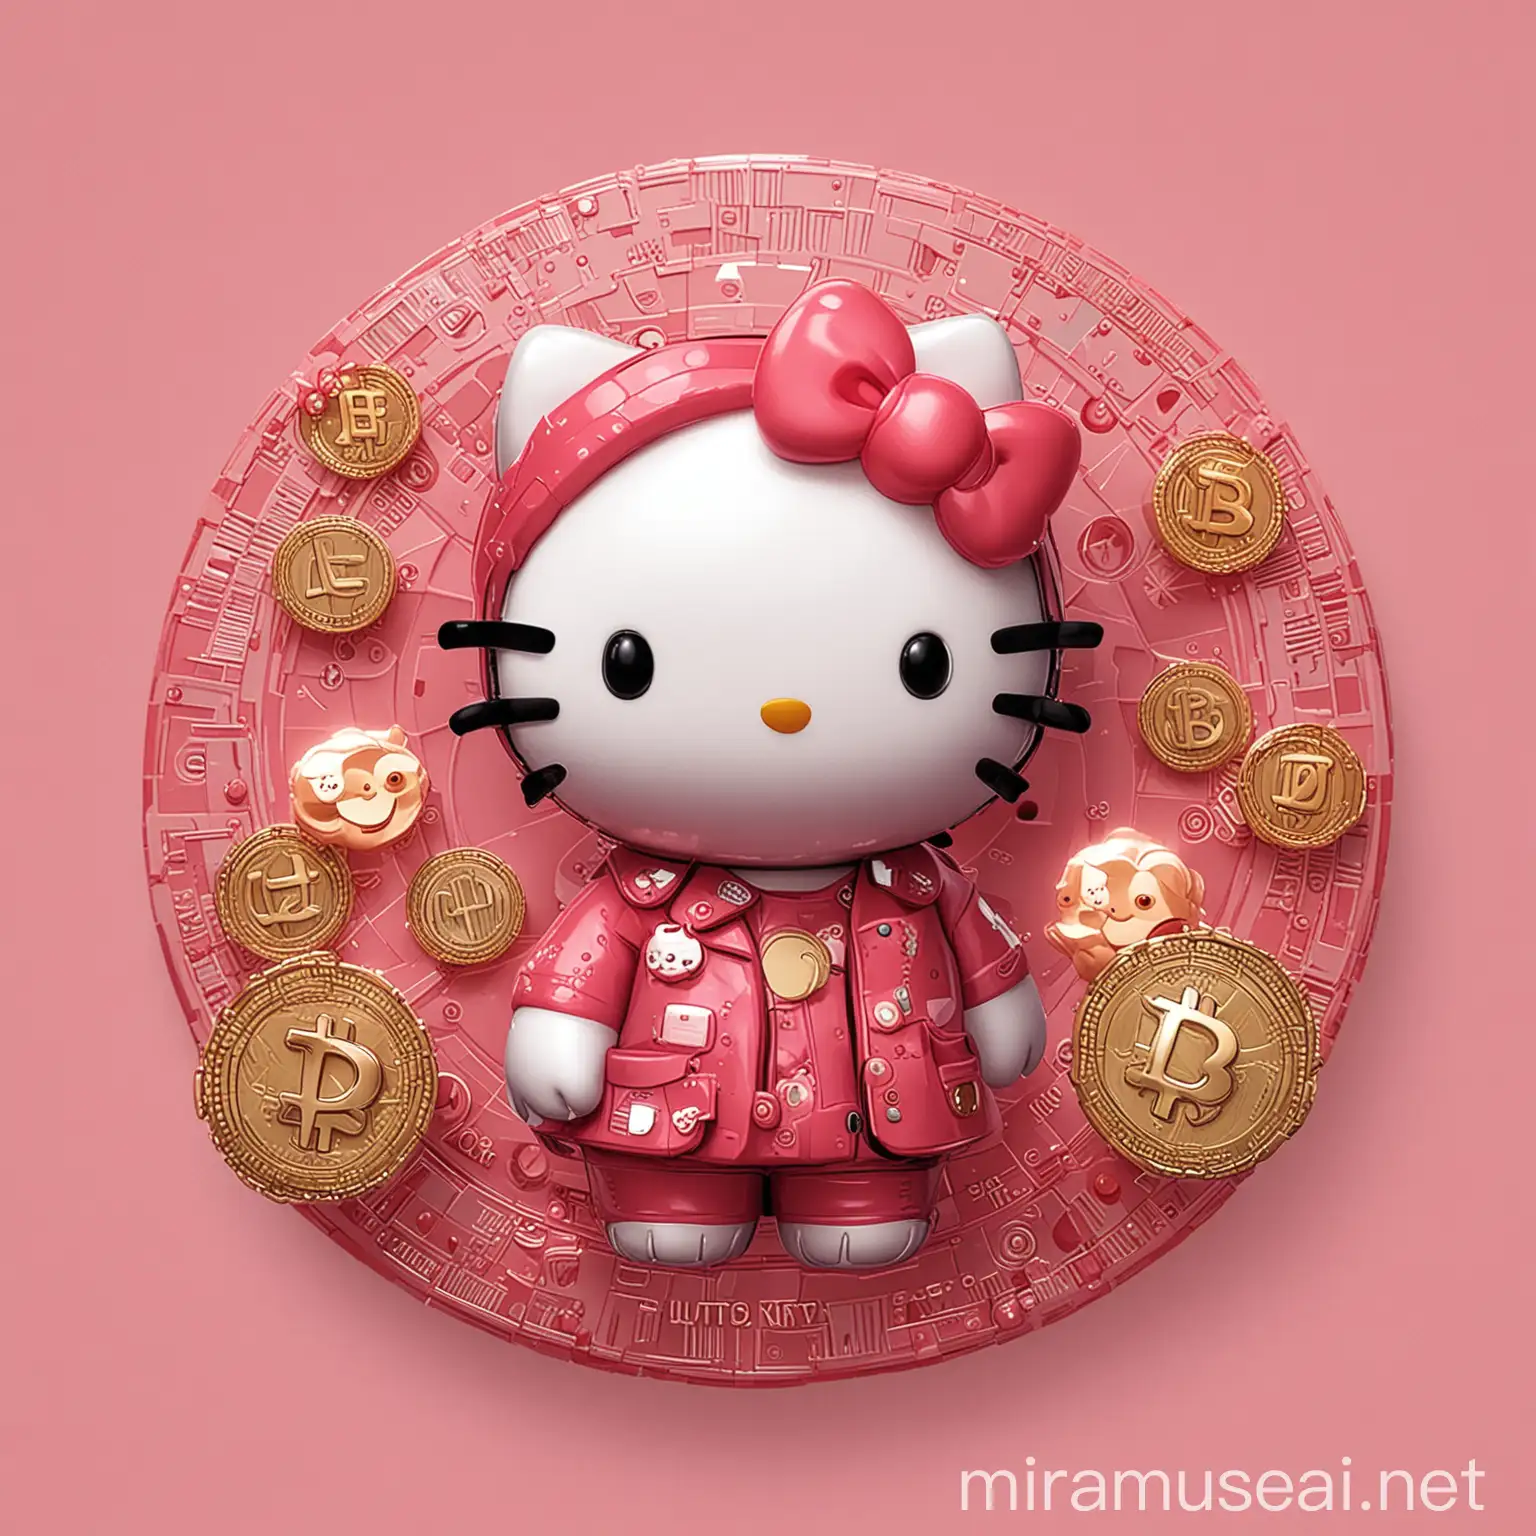 Hello Kitty Cryptocurrency Profile Picture Playful Kitty with Digital Currency Elements